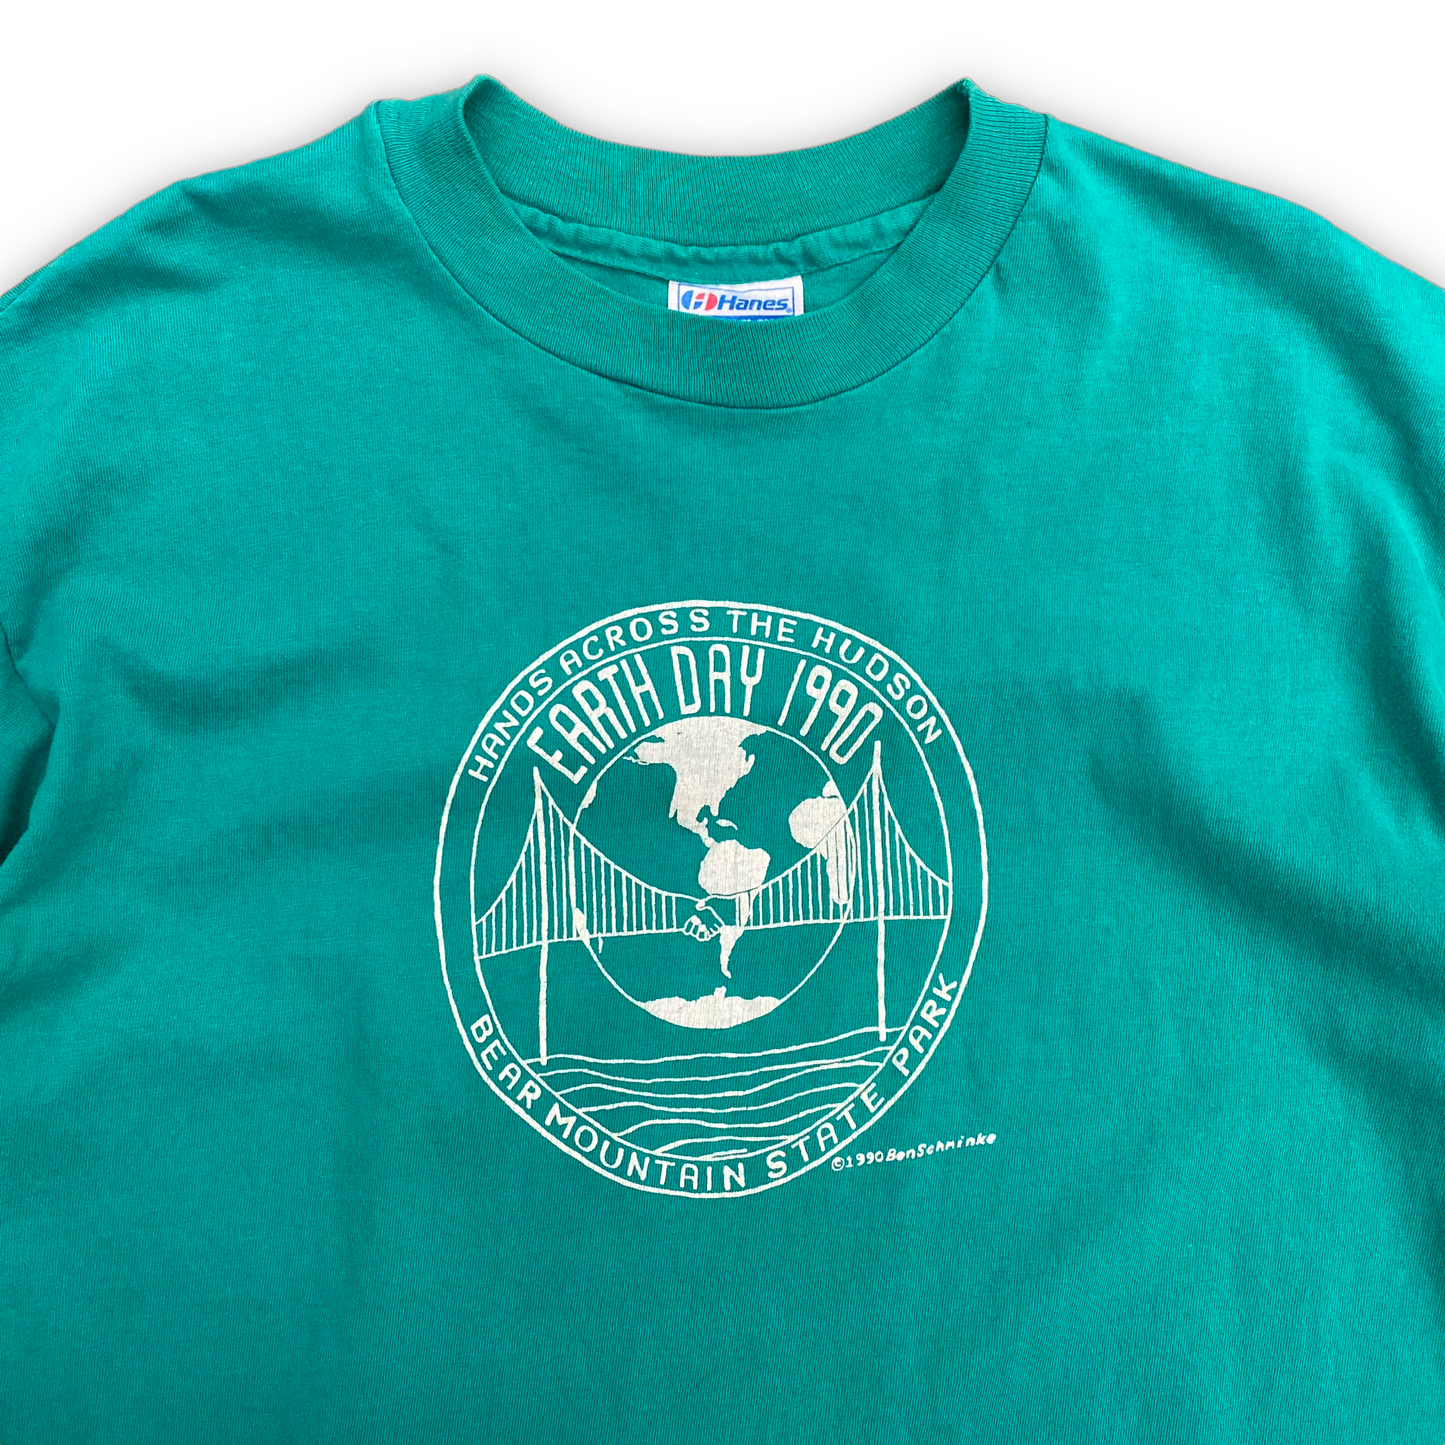 1990 Bear Mountain State Park Earth Day Tee - Size XL